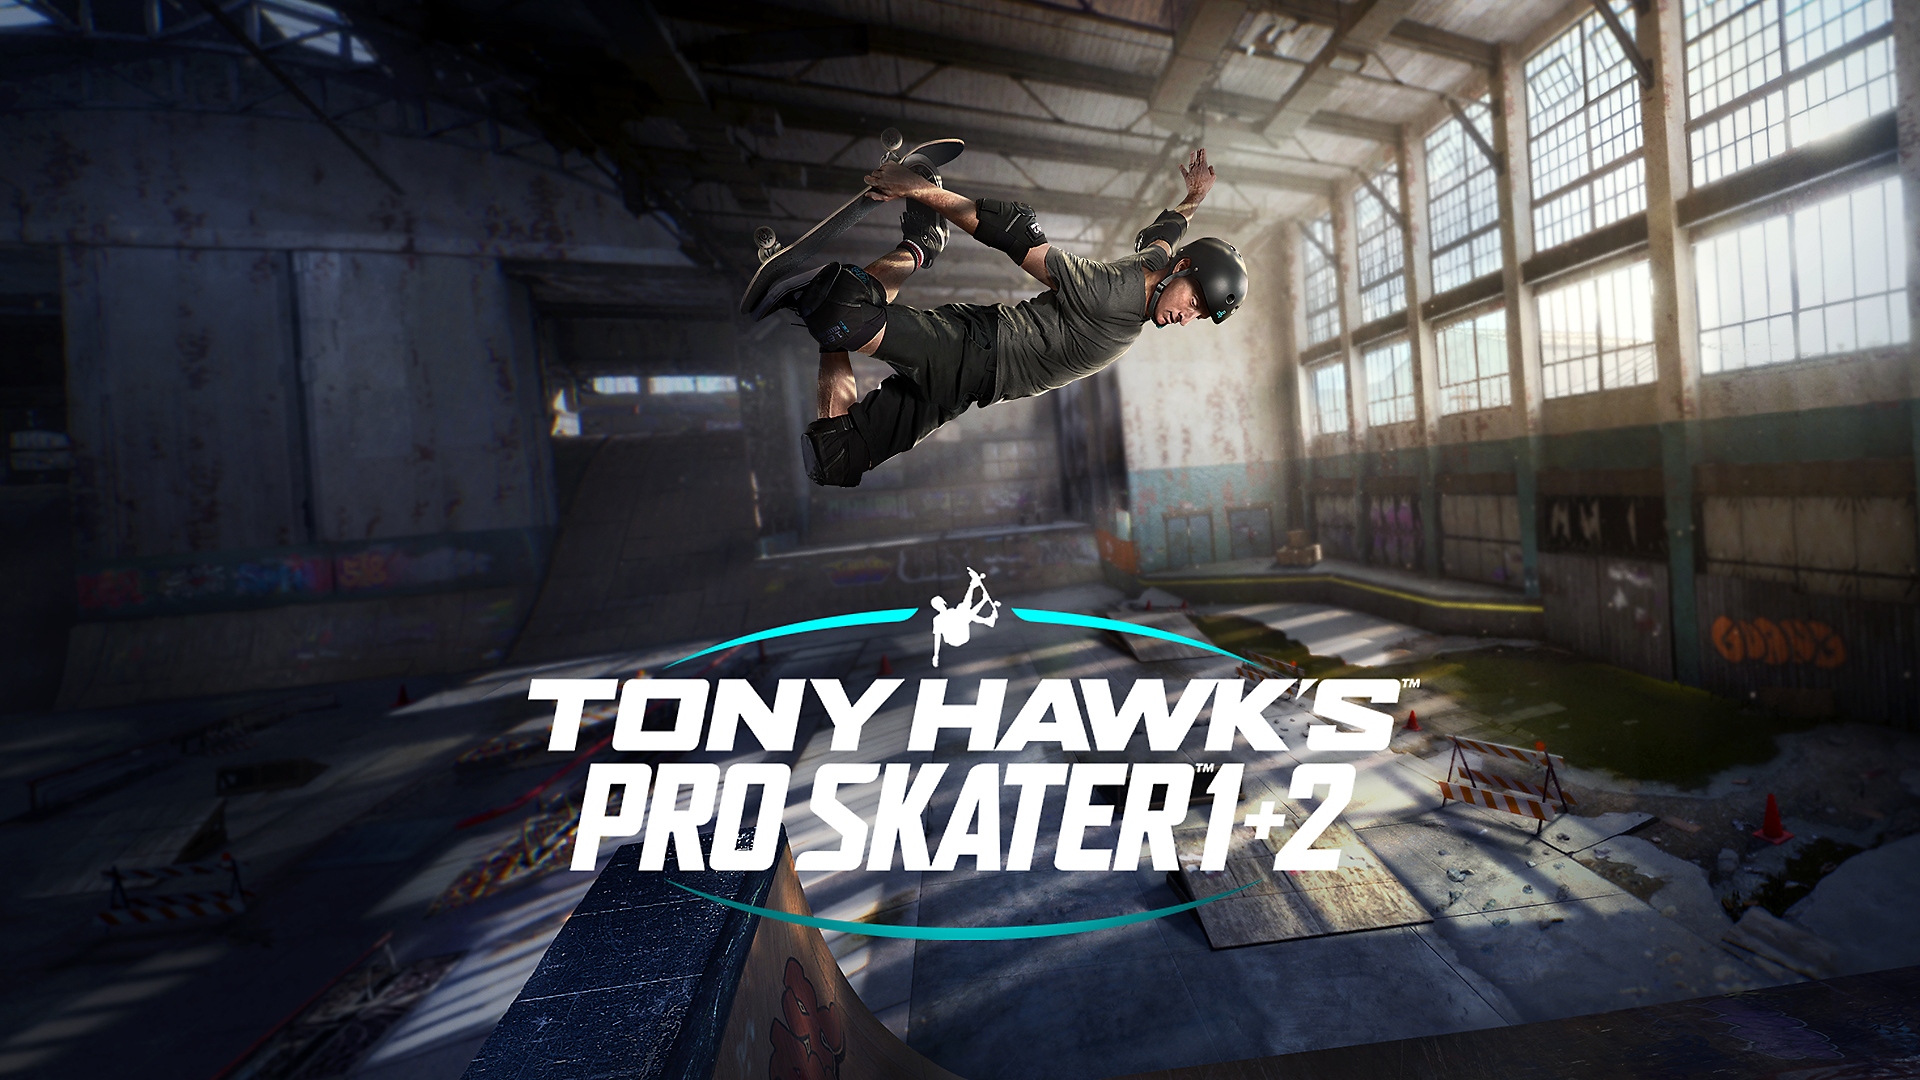 Tony Hawk’s Pro Skater 1 and 2 - Launch Trailer | PS4